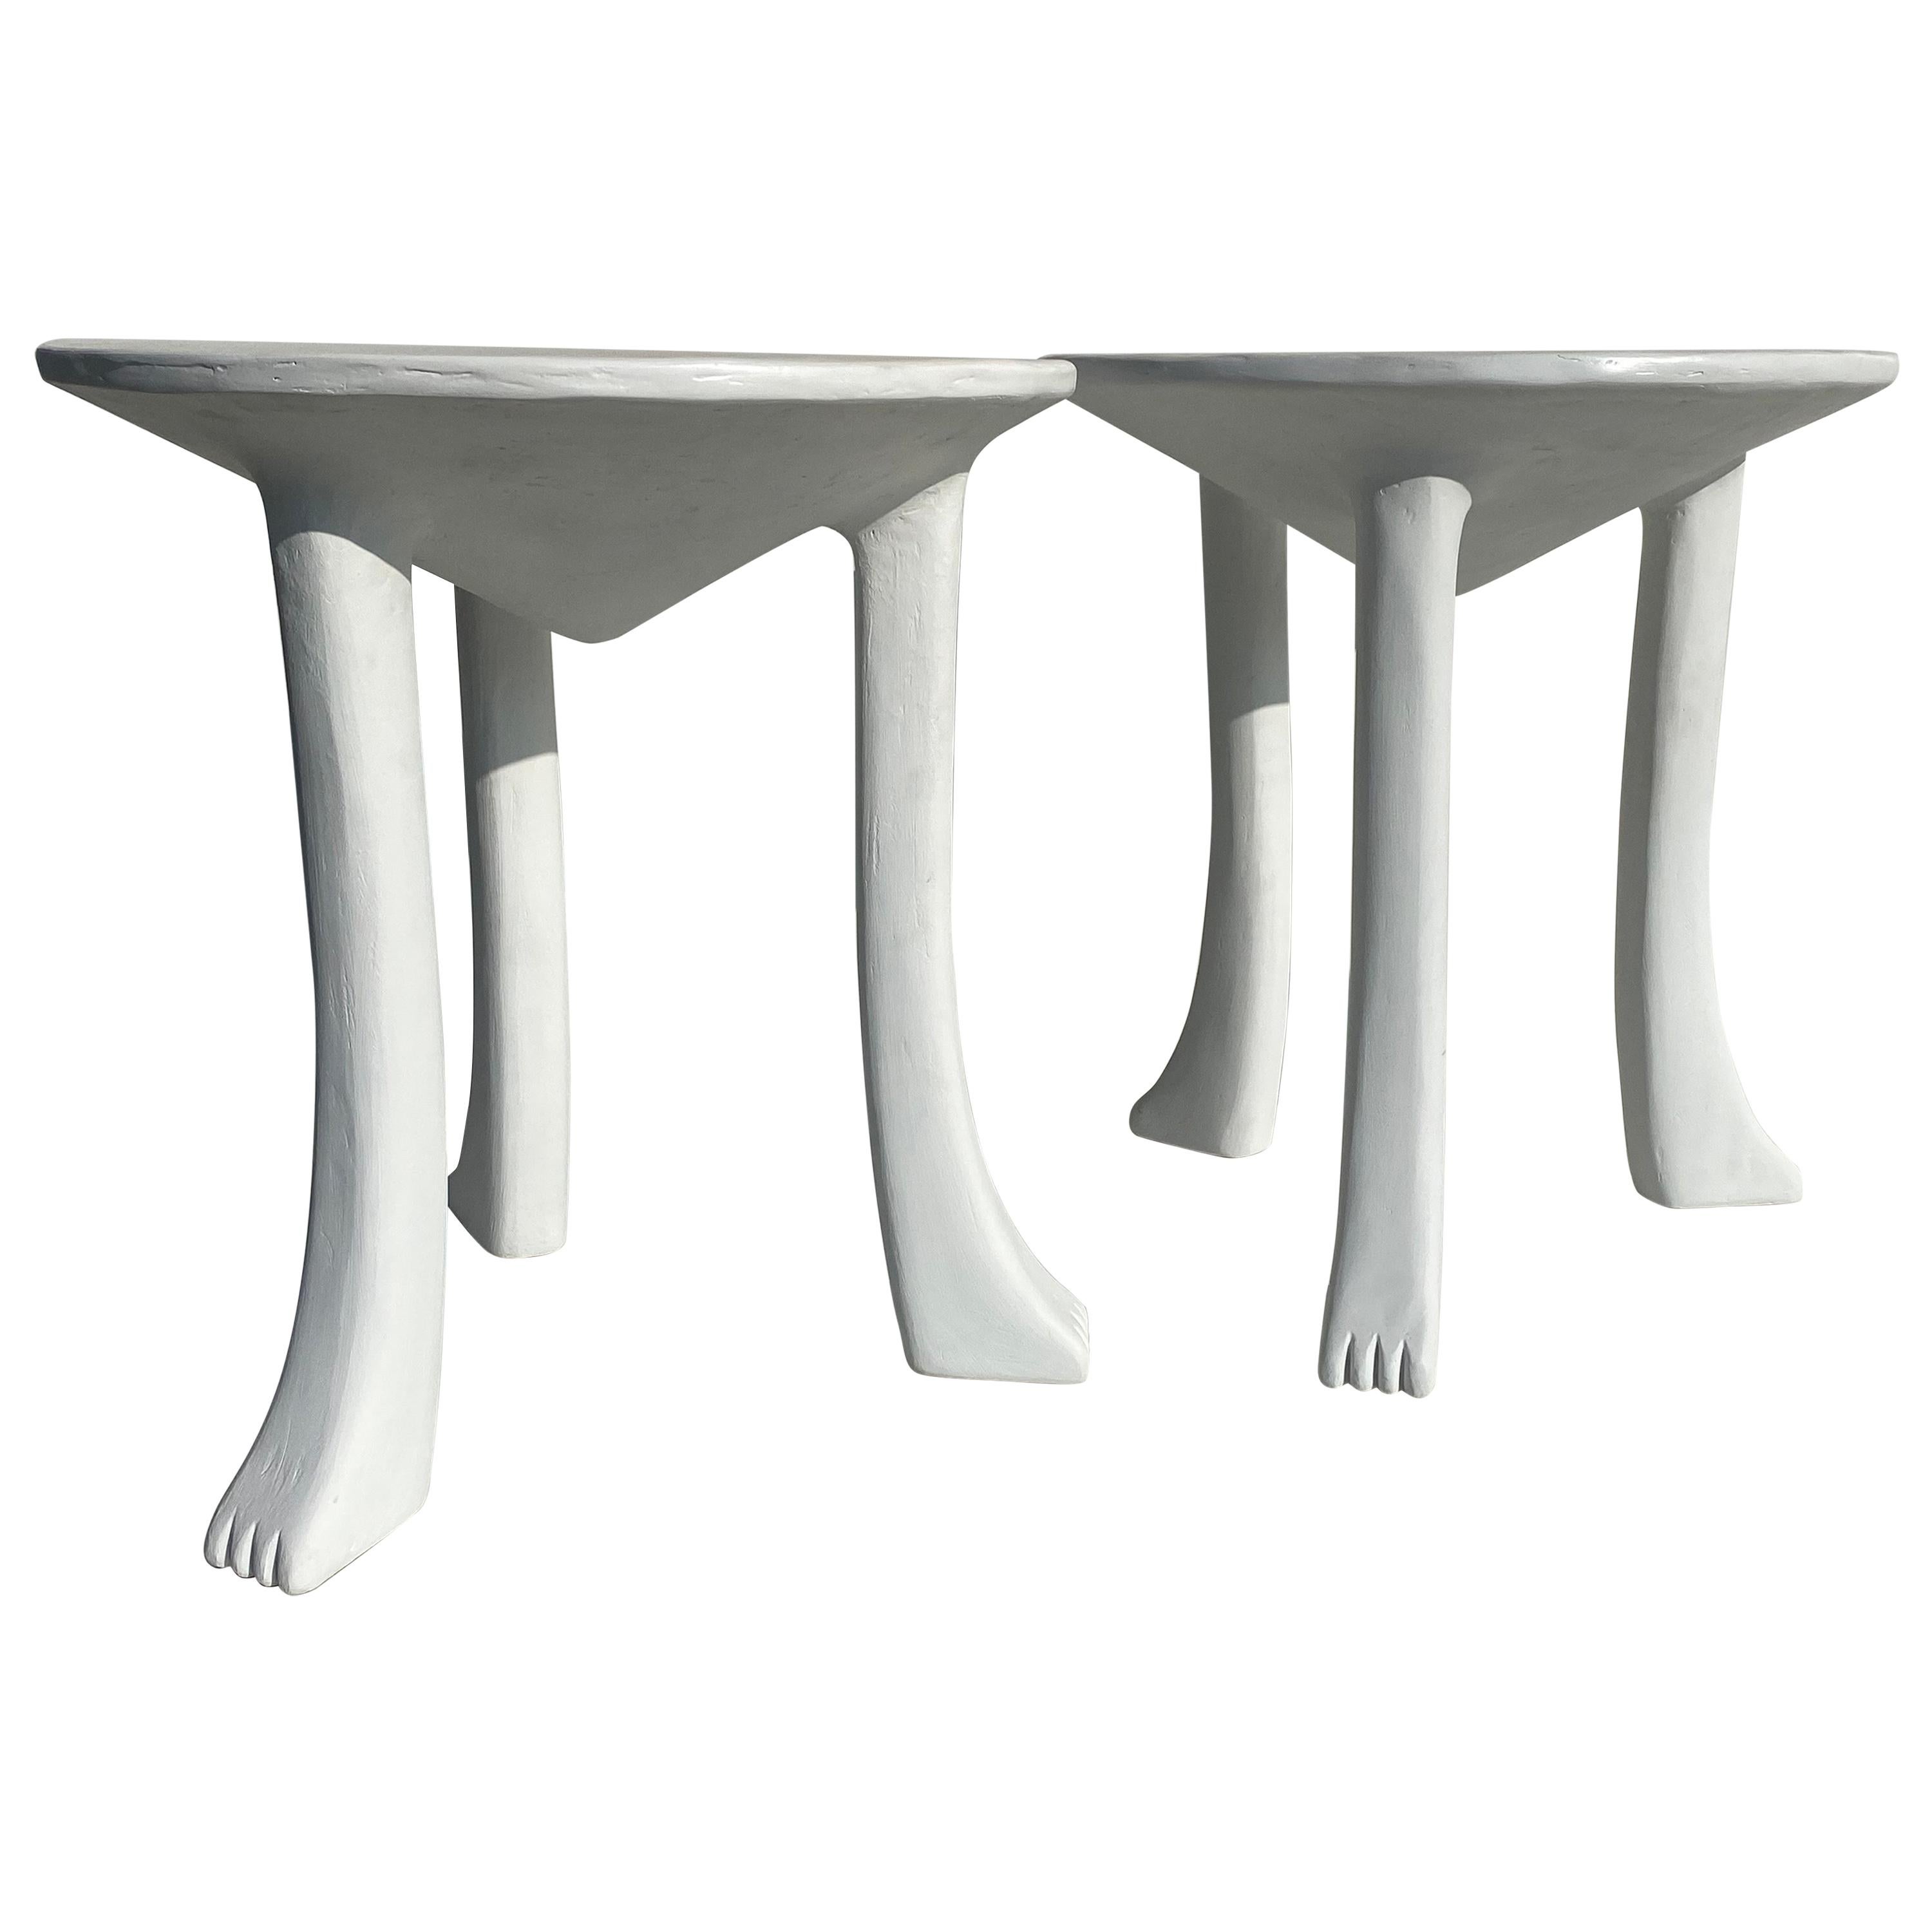 Pair of African Plaster Side Tables